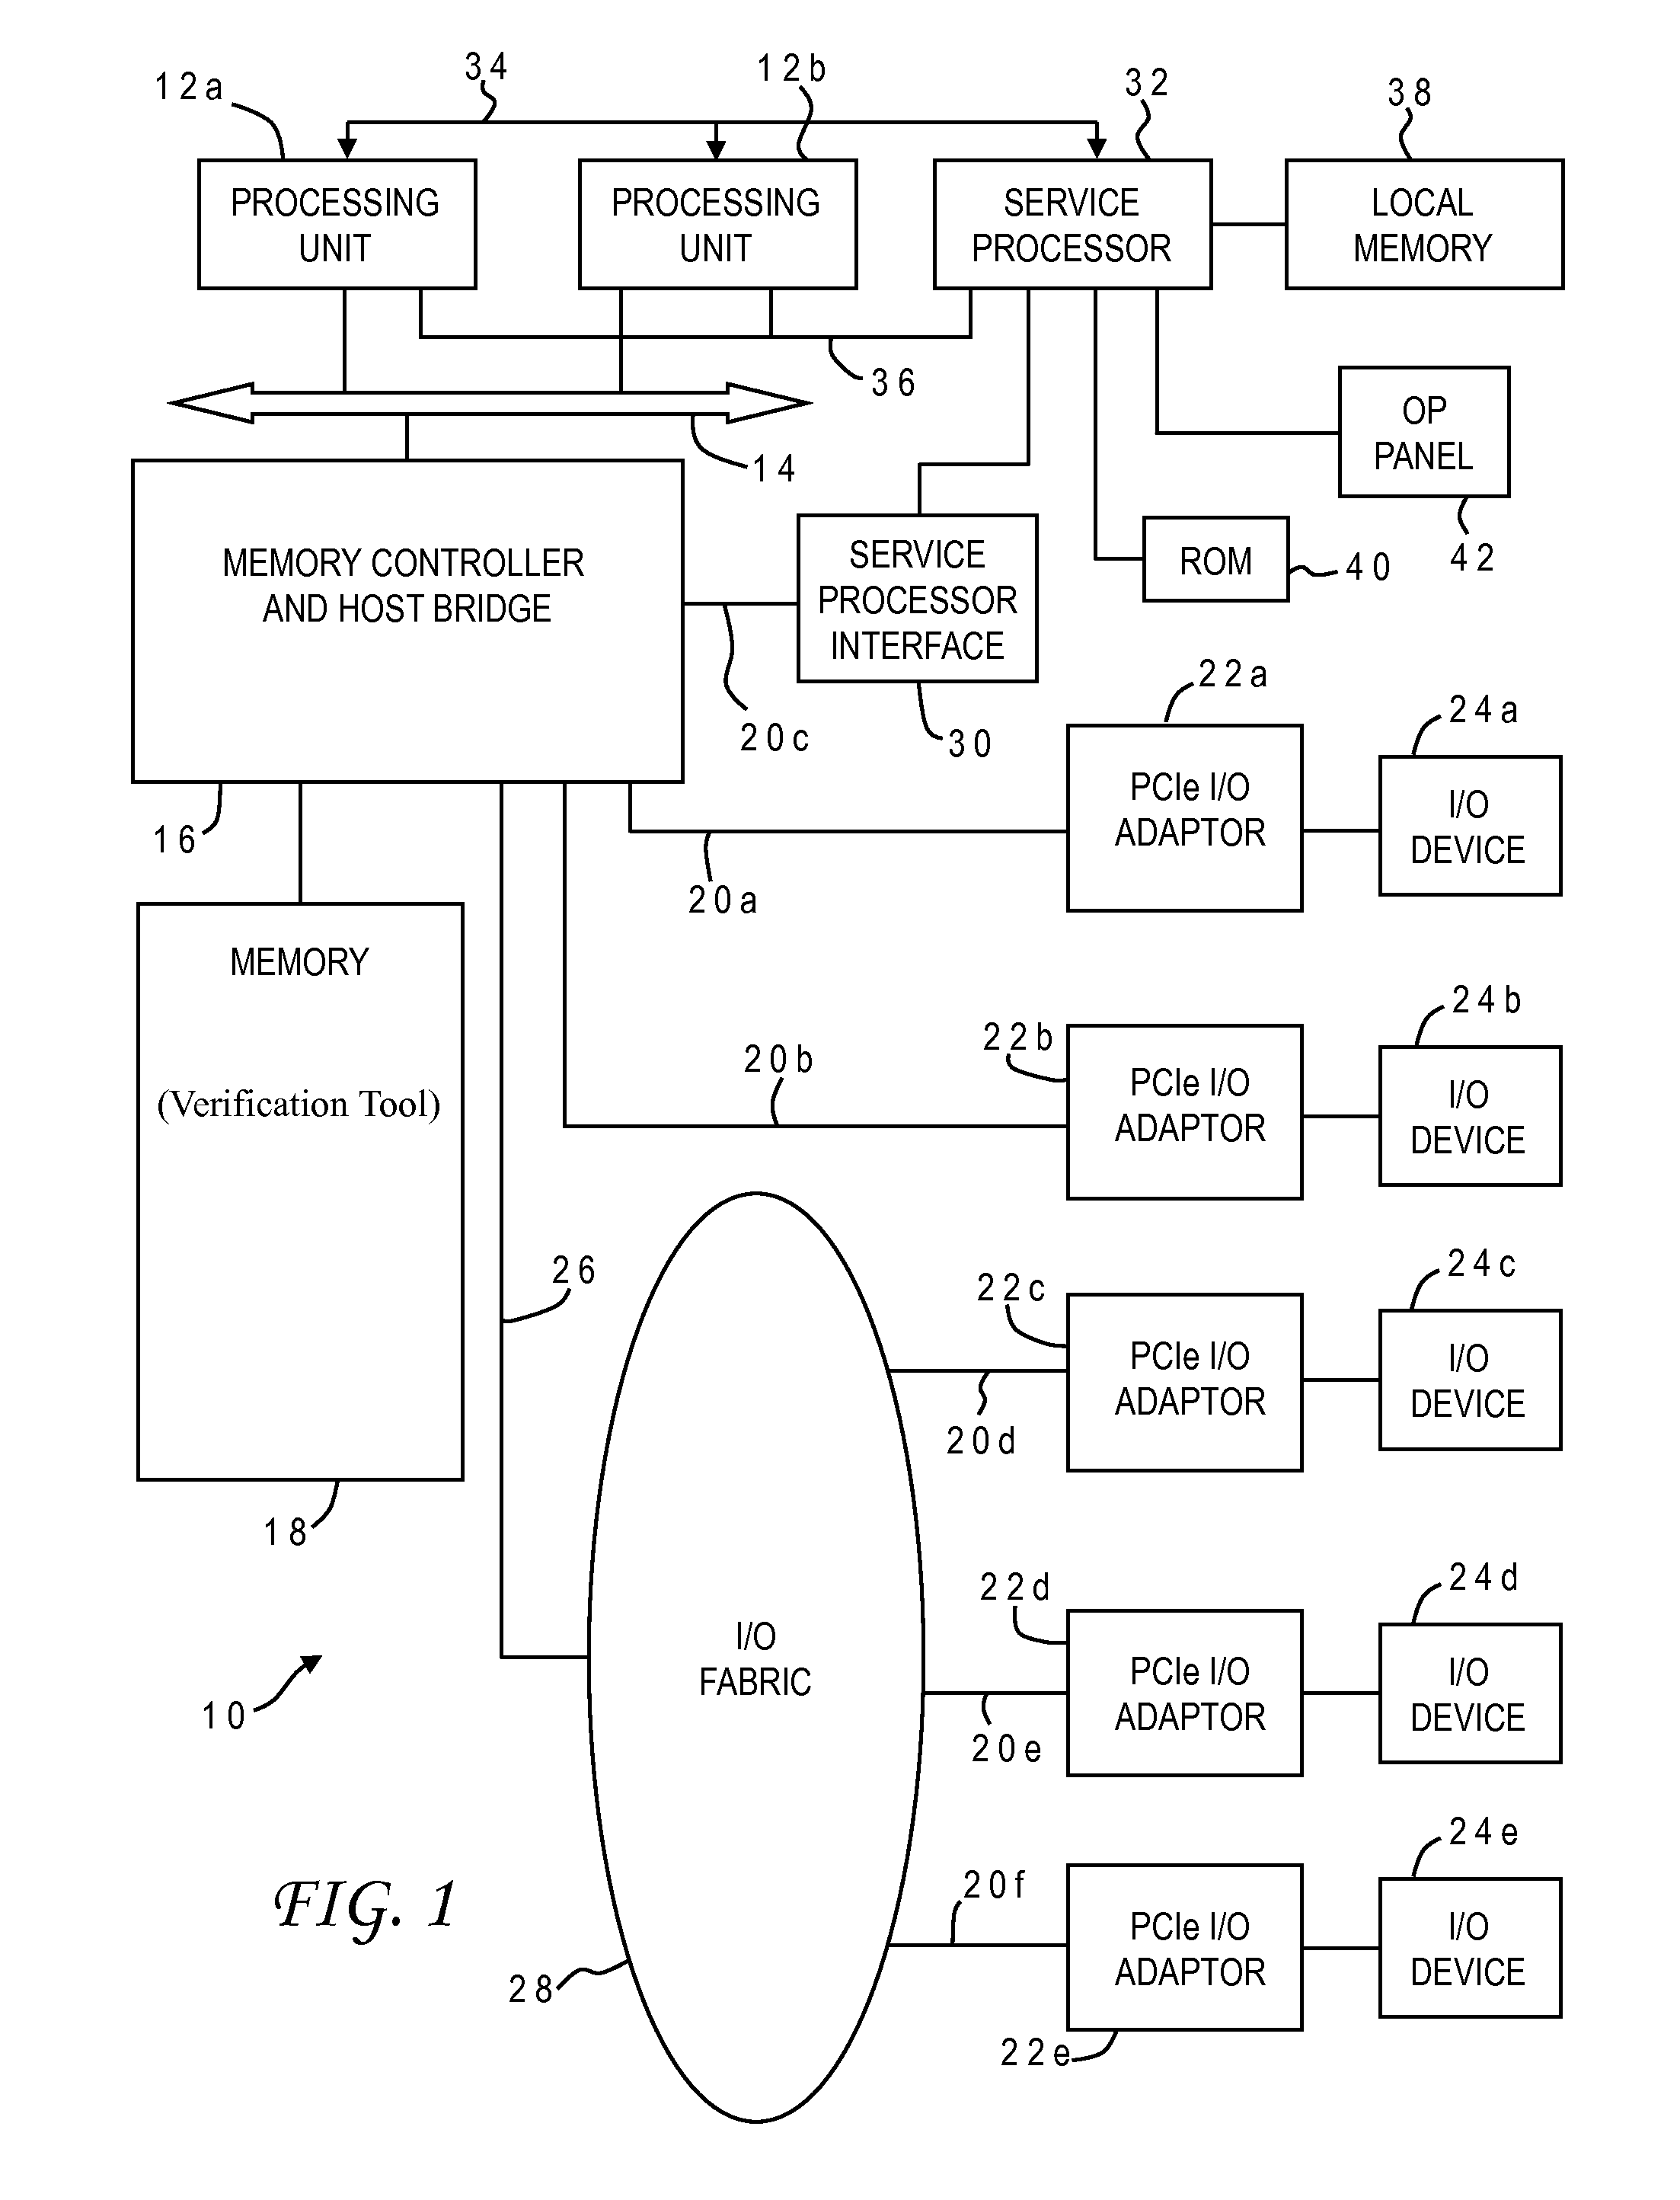 Efficient validation of coherency between processor cores and accelerators in computer systems